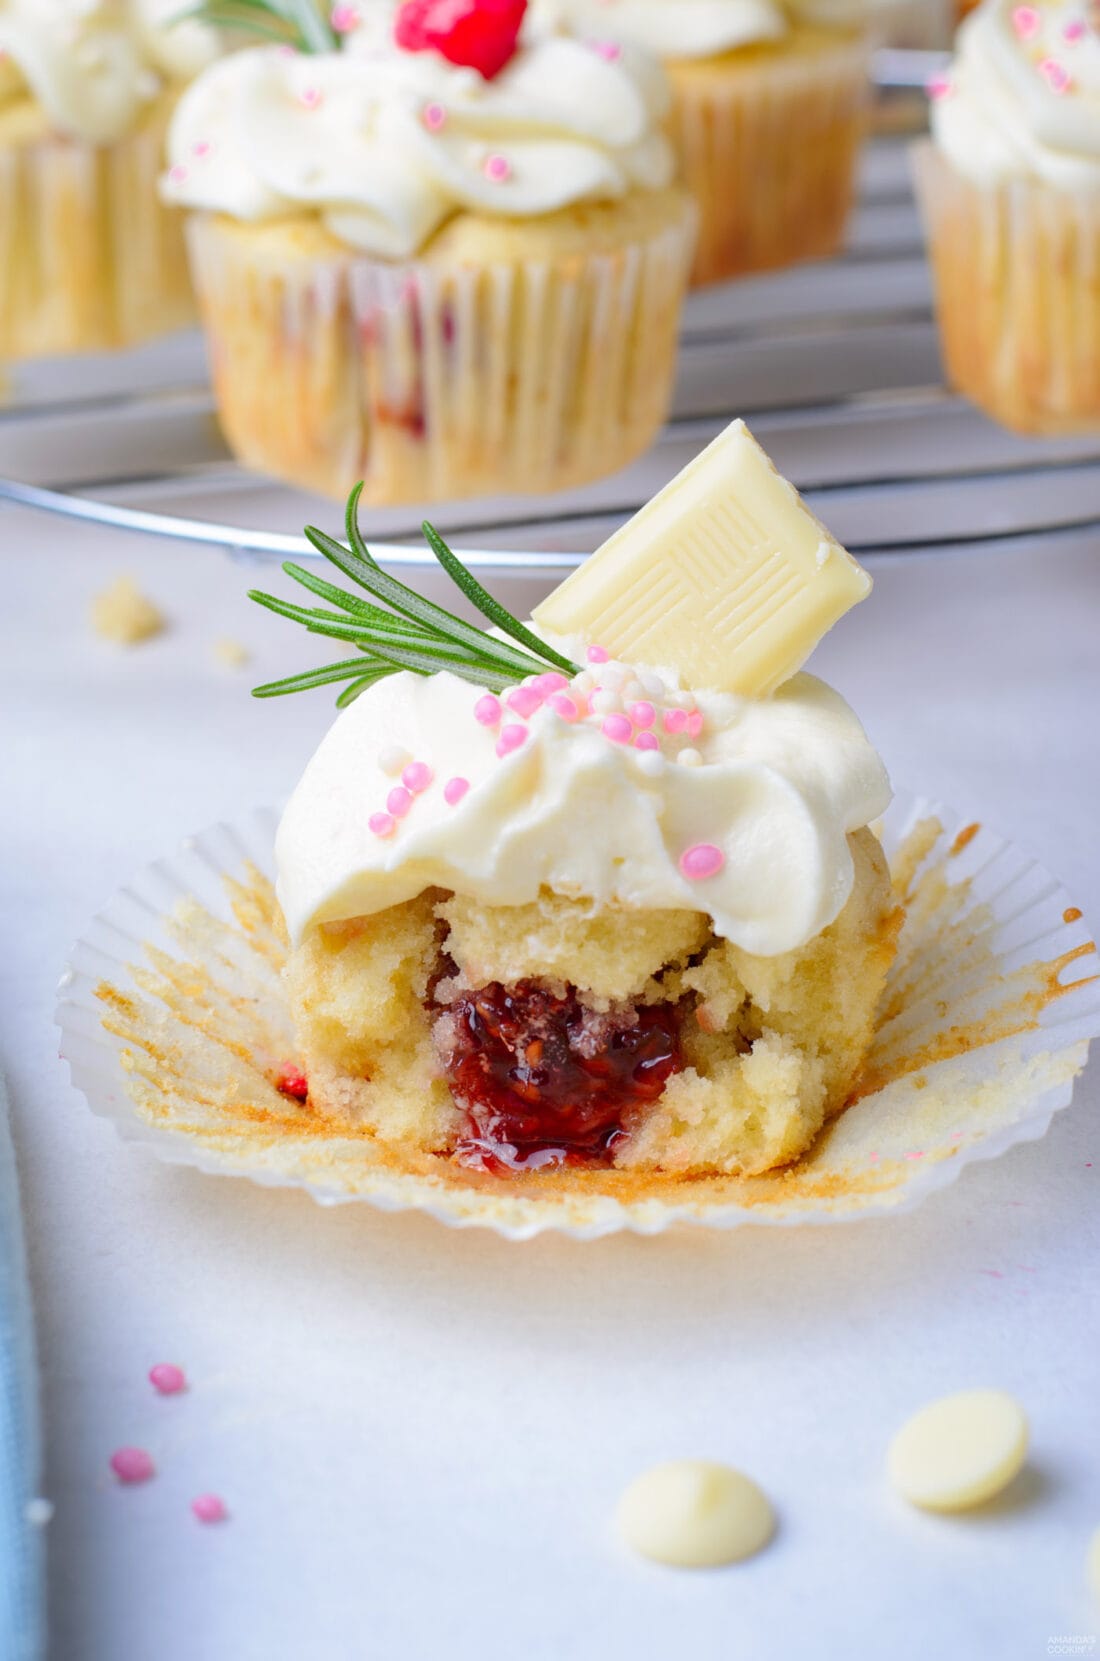 Raspberry White Chocolate Cupcakes cut in half showing filling